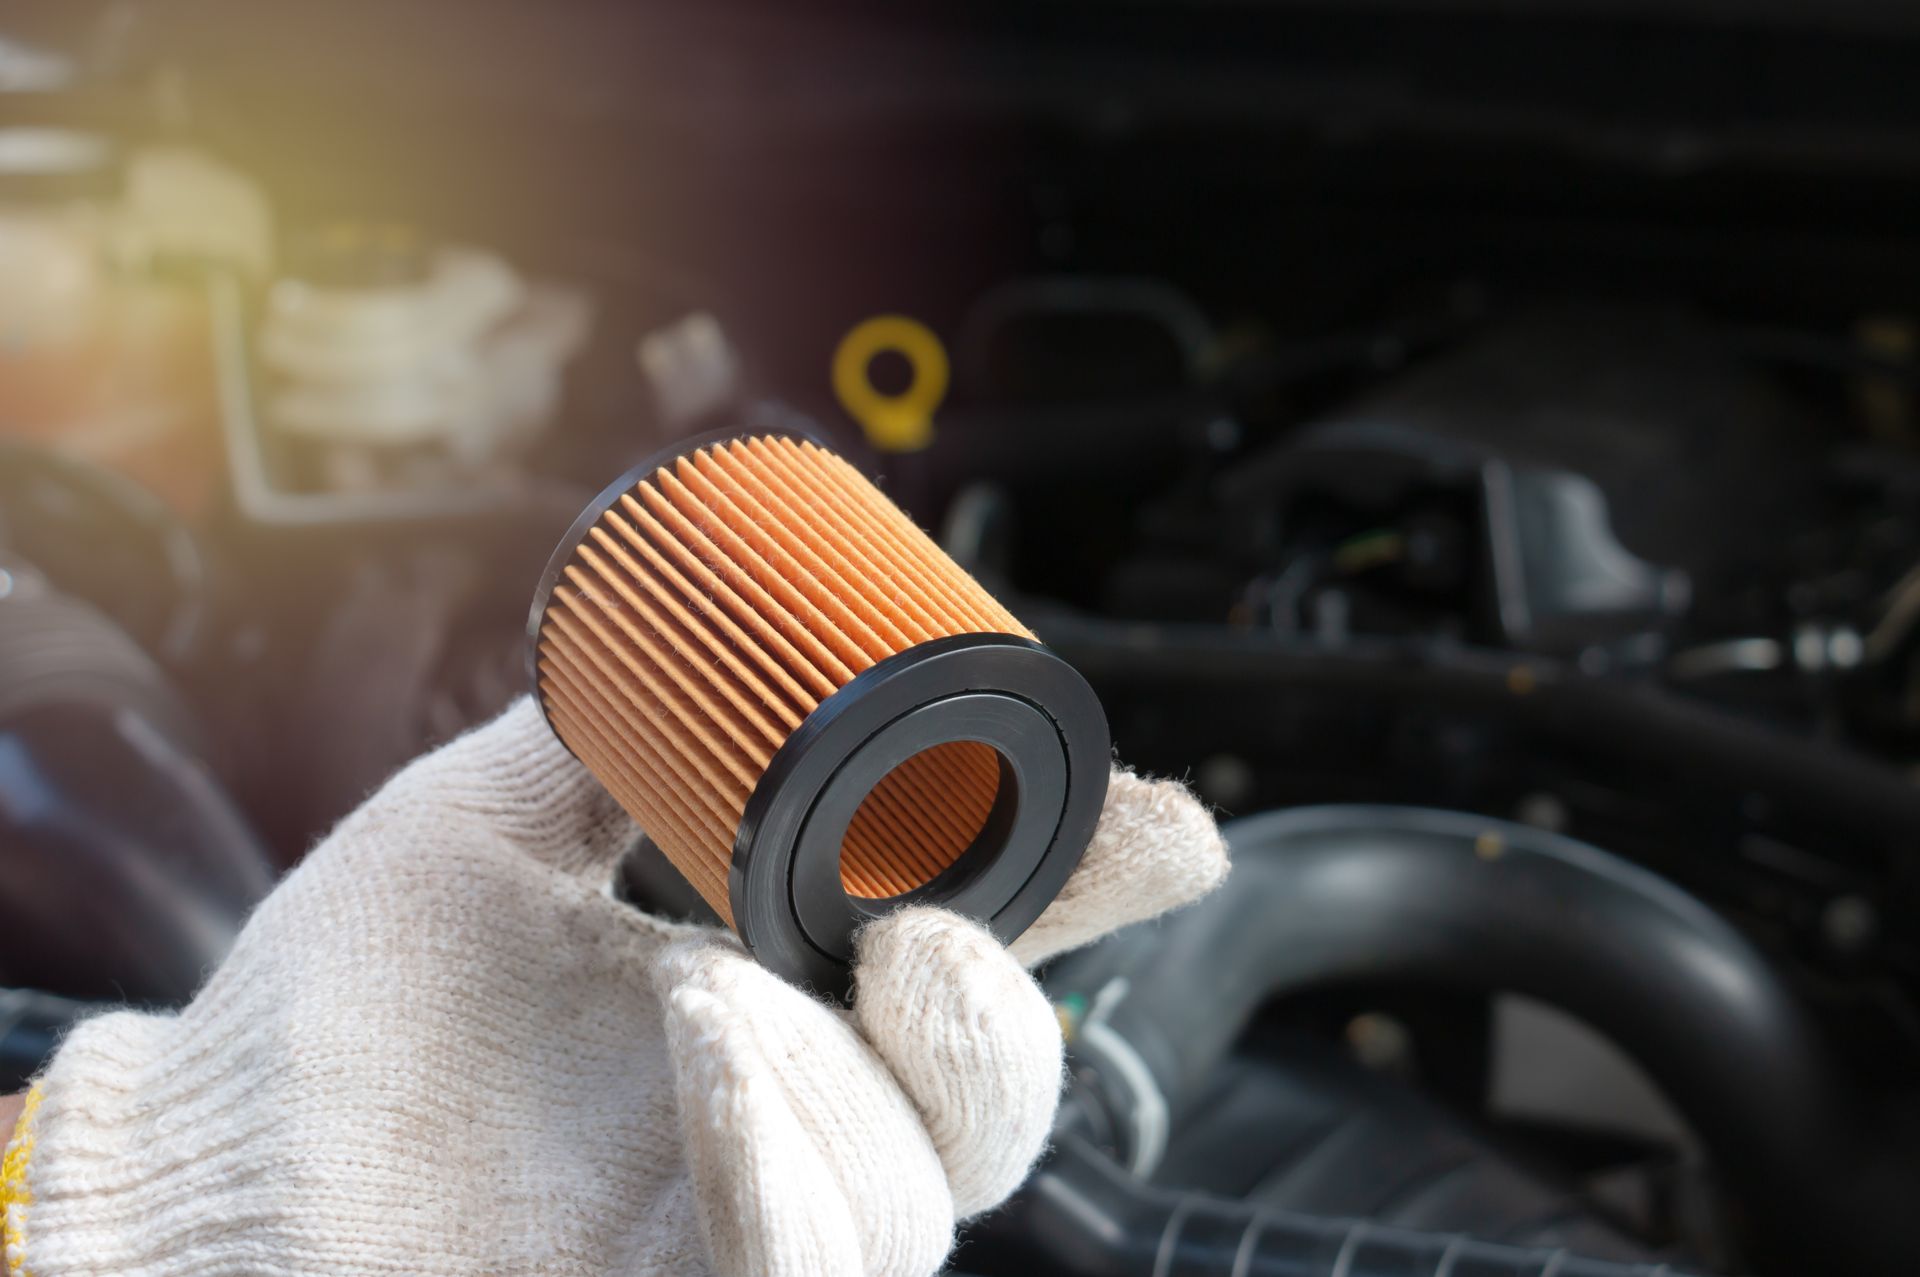 Fuel Filter Service at ﻿Capeway Auto Service and Towing﻿ in ﻿Hanover, MA﻿